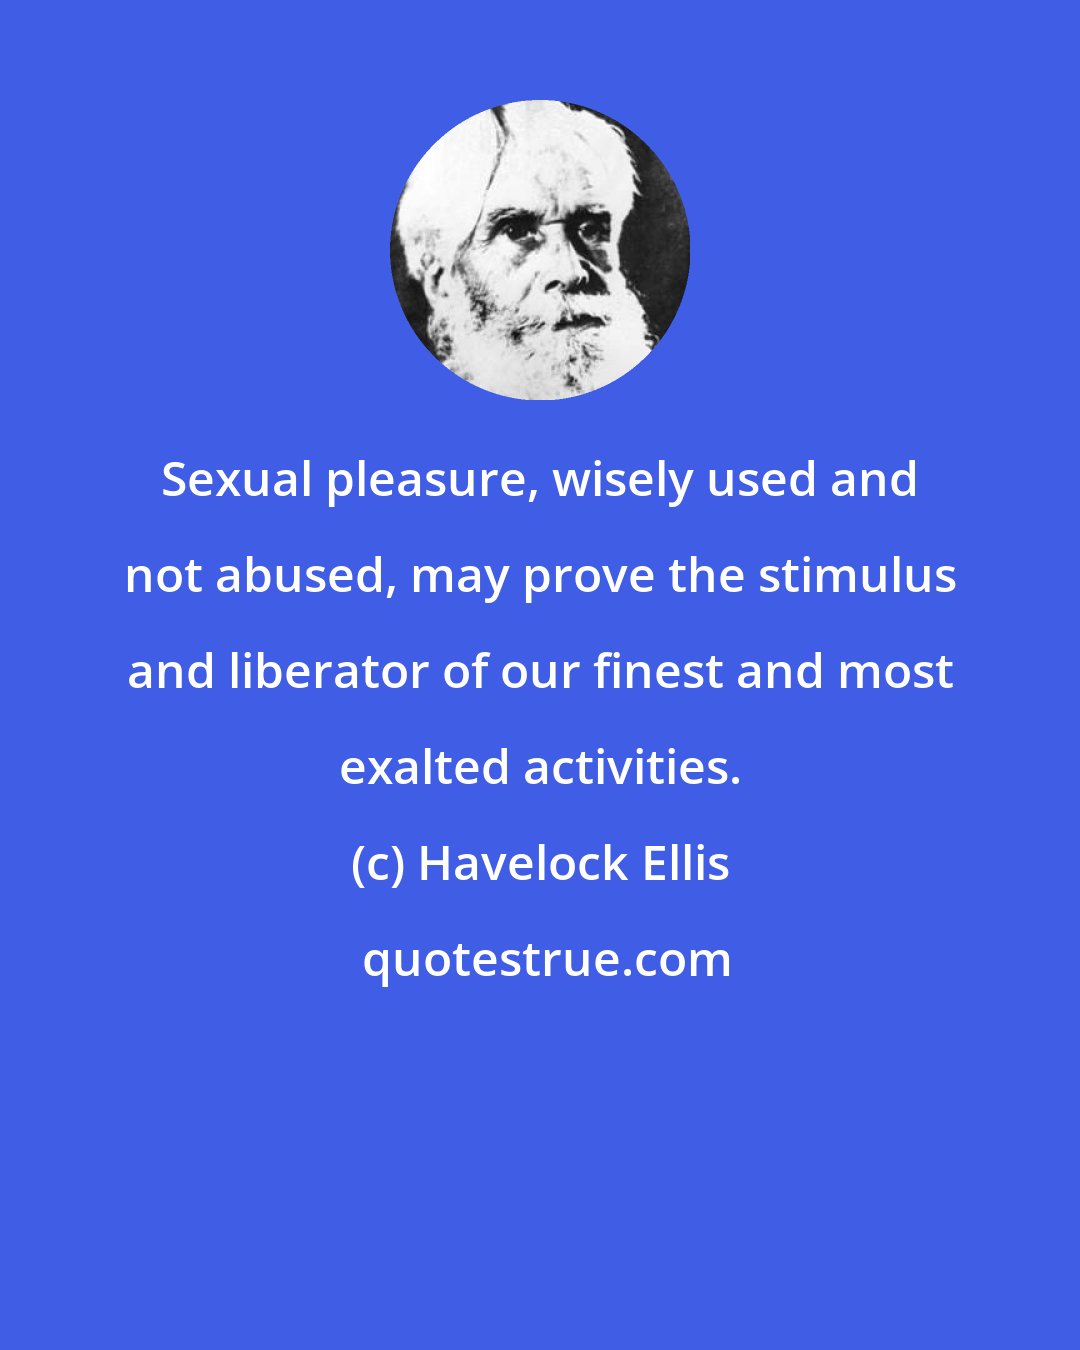 Havelock Ellis: Sexual pleasure, wisely used and not abused, may prove the stimulus and liberator of our finest and most exalted activities.